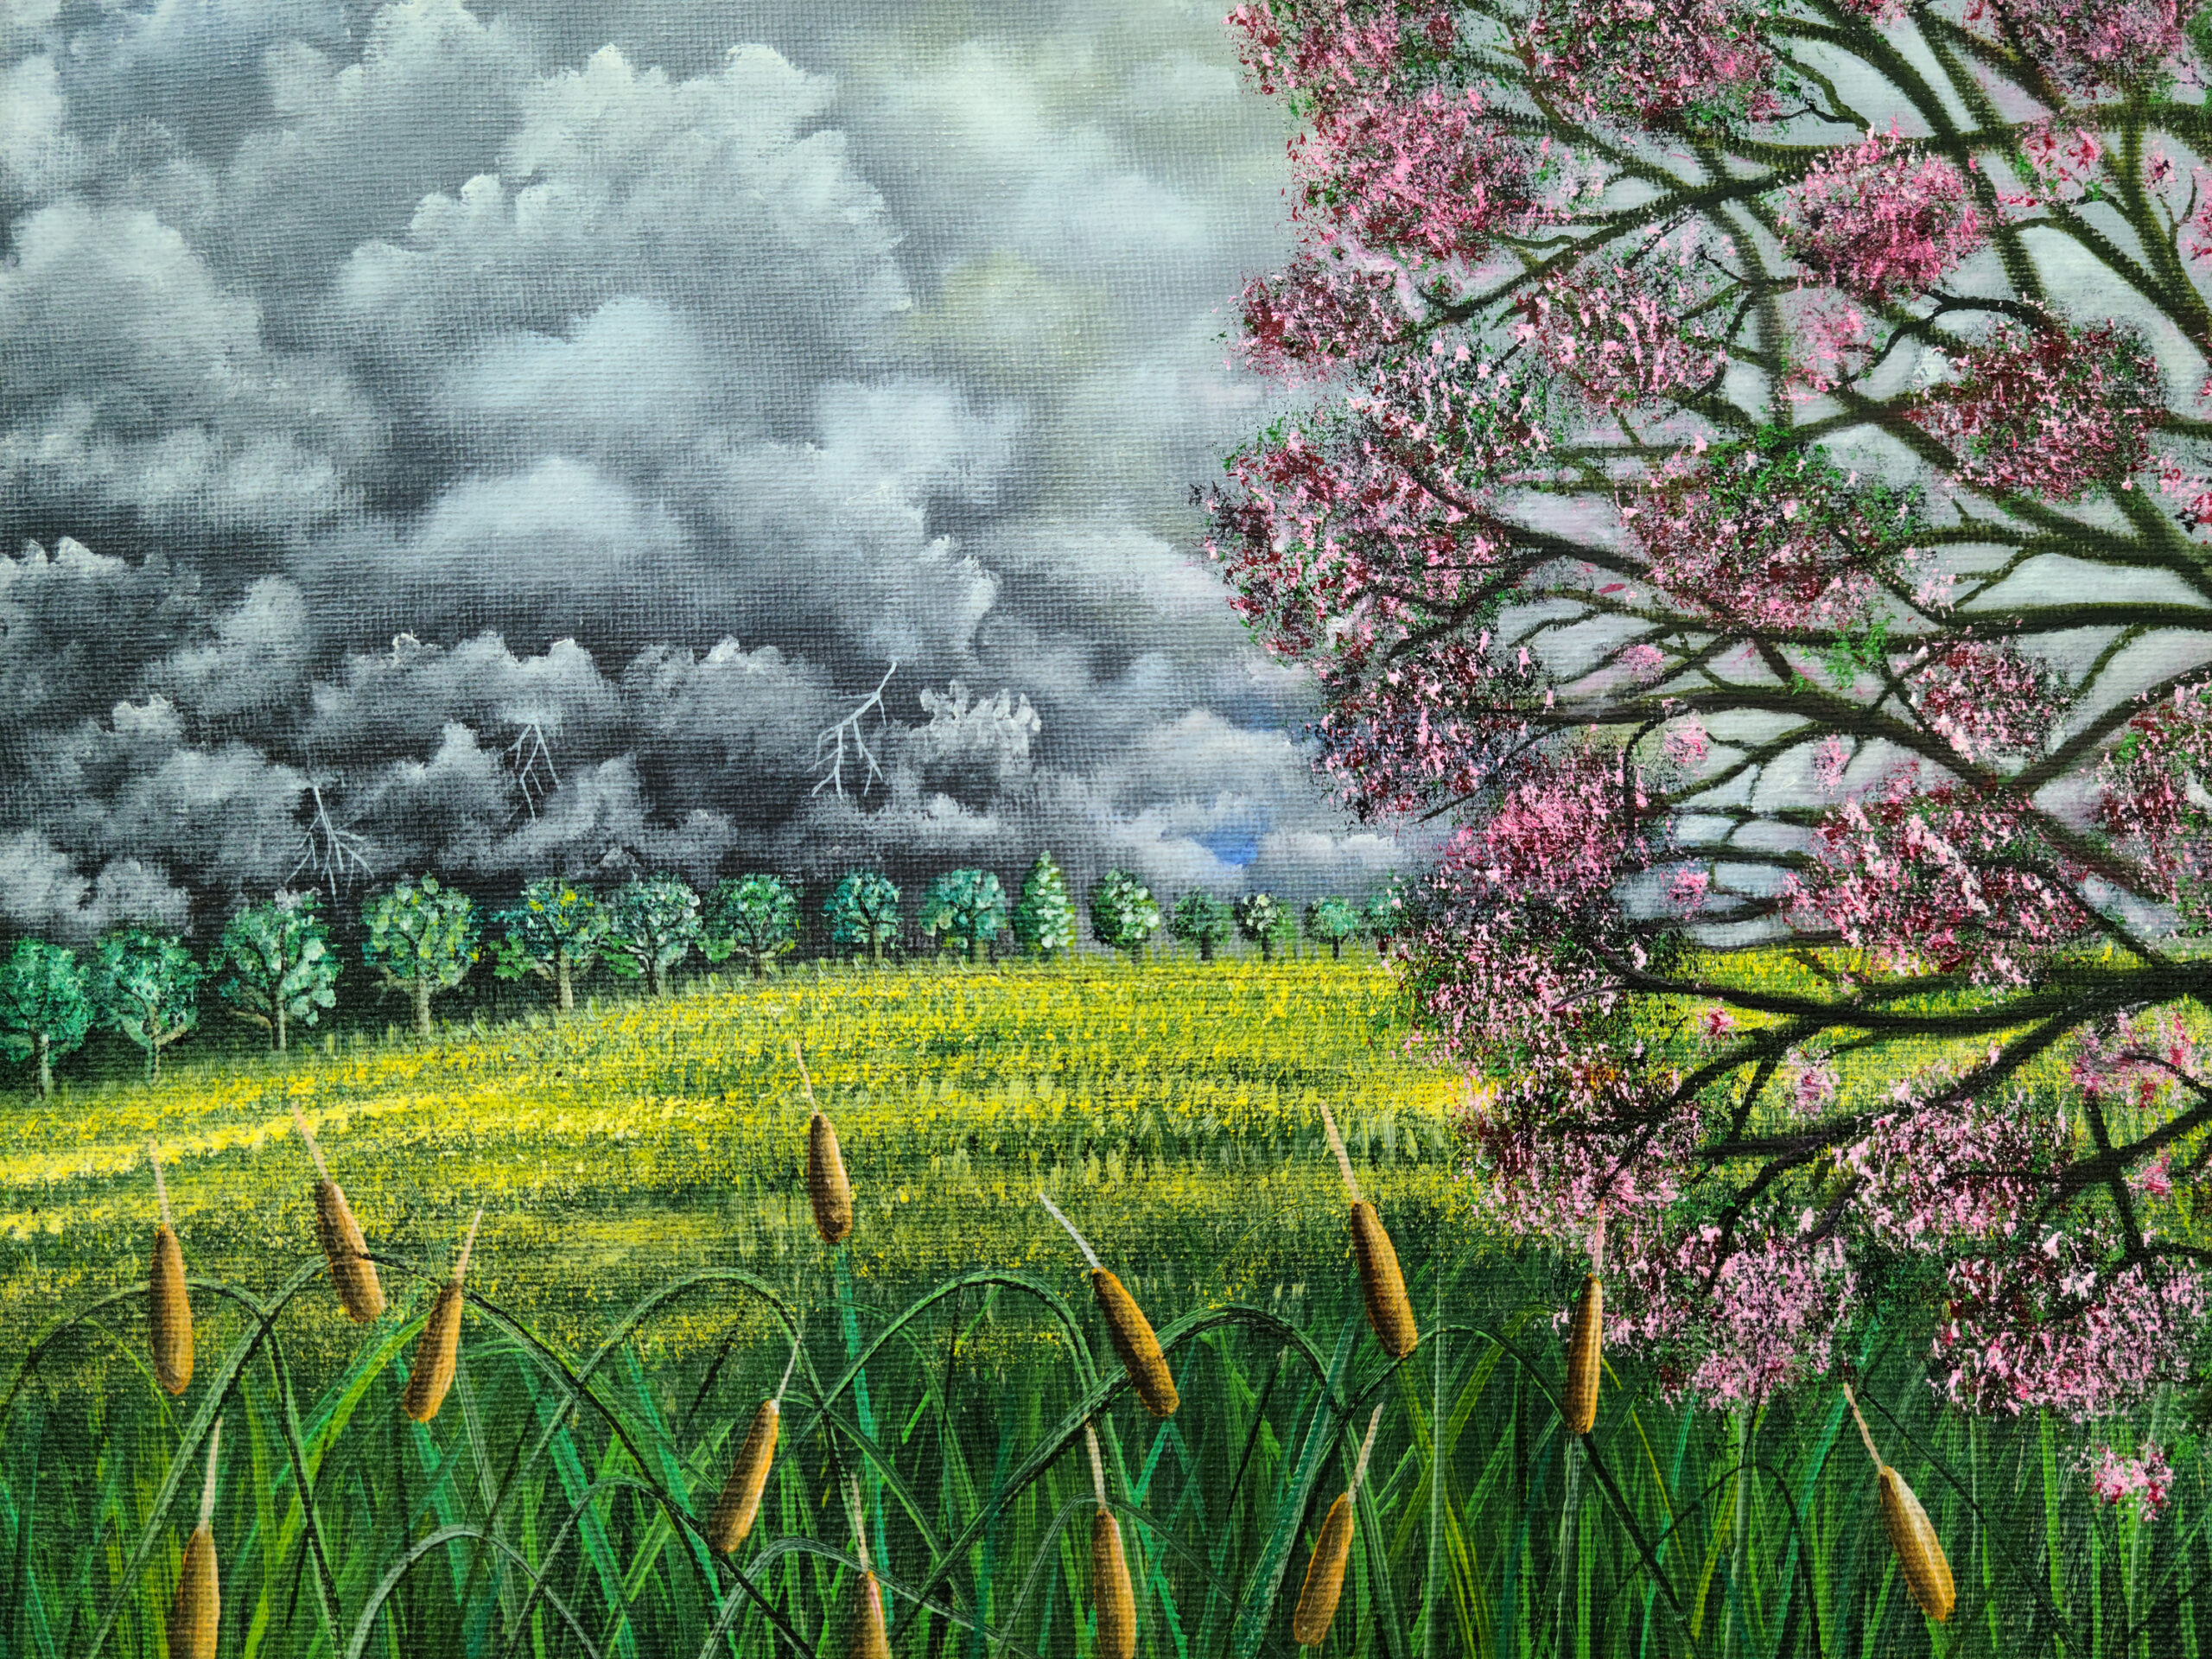 This original work is to relax your mind a bit. Every time I see it, I imagine the aroma of wet earth and wet grass lulled by the terrific blast of the wind and the breeze caressing my face while I watch the rain pass in the field. What happens is that it also causes adrenaline from running very hard but at the same time fleeing from how bad what we perceive on the horizon can be.